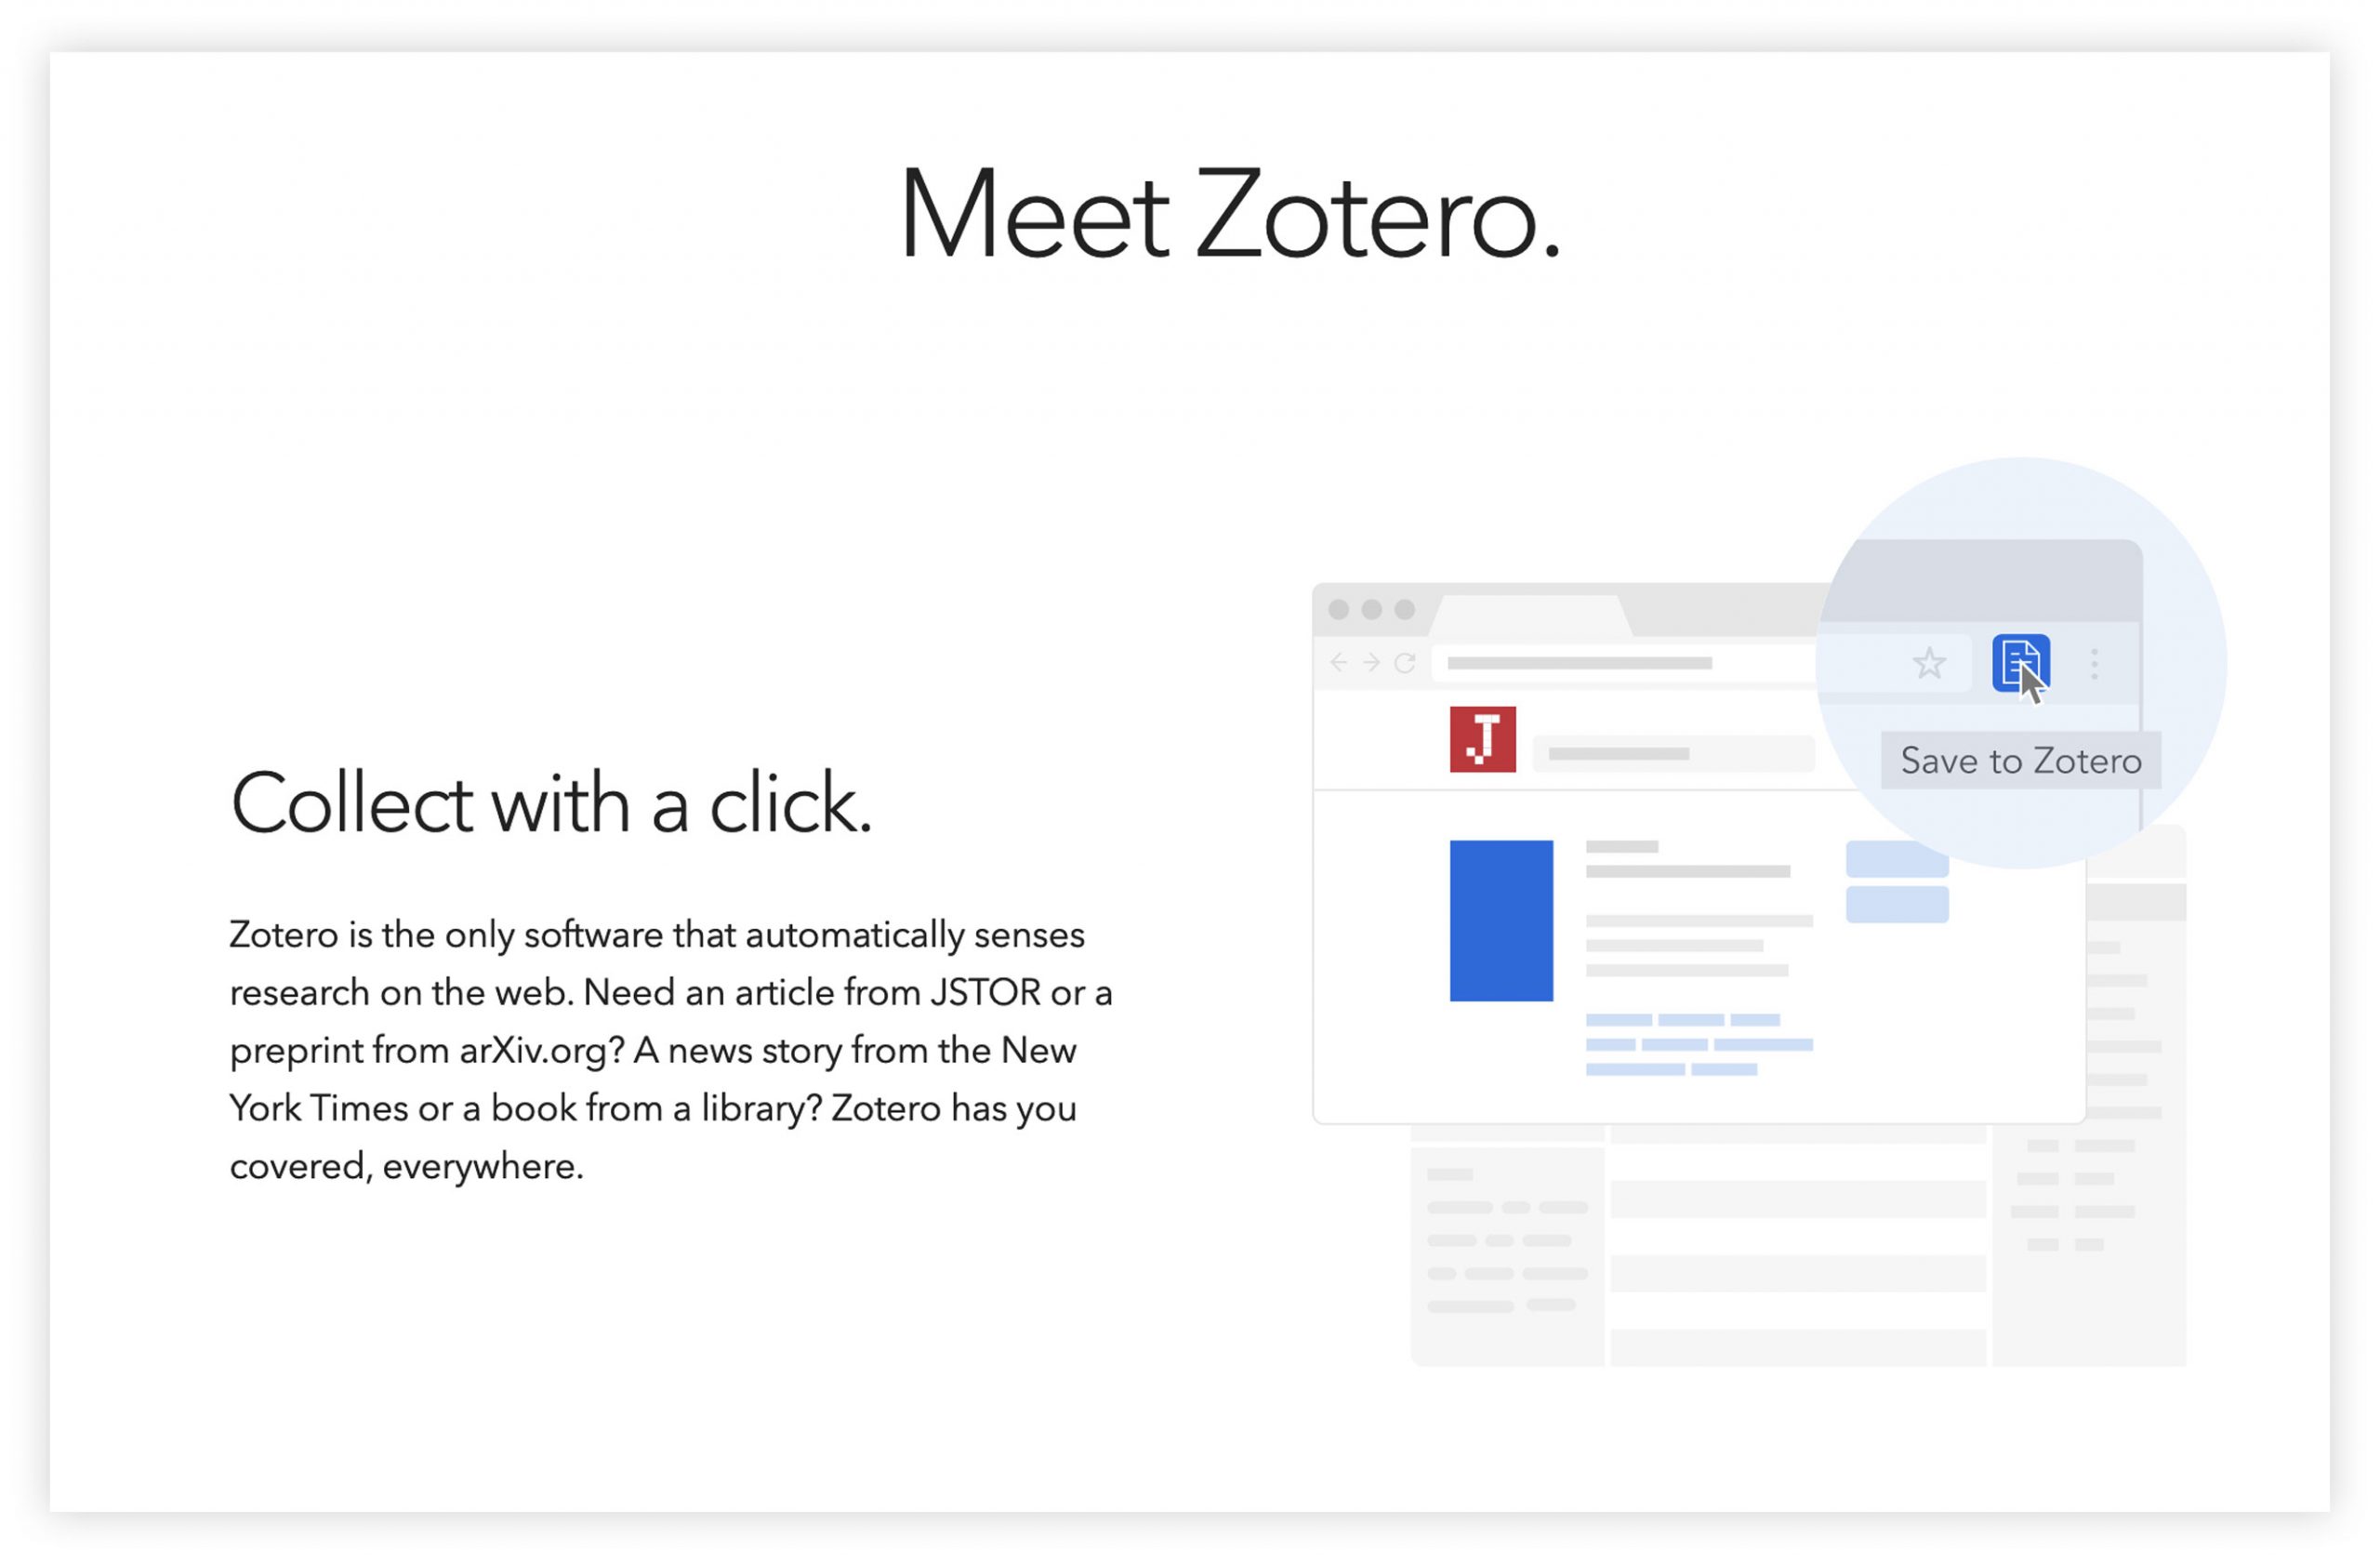 Meet Zotero. Collect with a click. Zotero is the only software that automatically senses research on the web. Need an article from JSTOR or a preprint from arXiv.org? A news story from the New York Times or a book from a library? Zotero has you covered, everywhere.